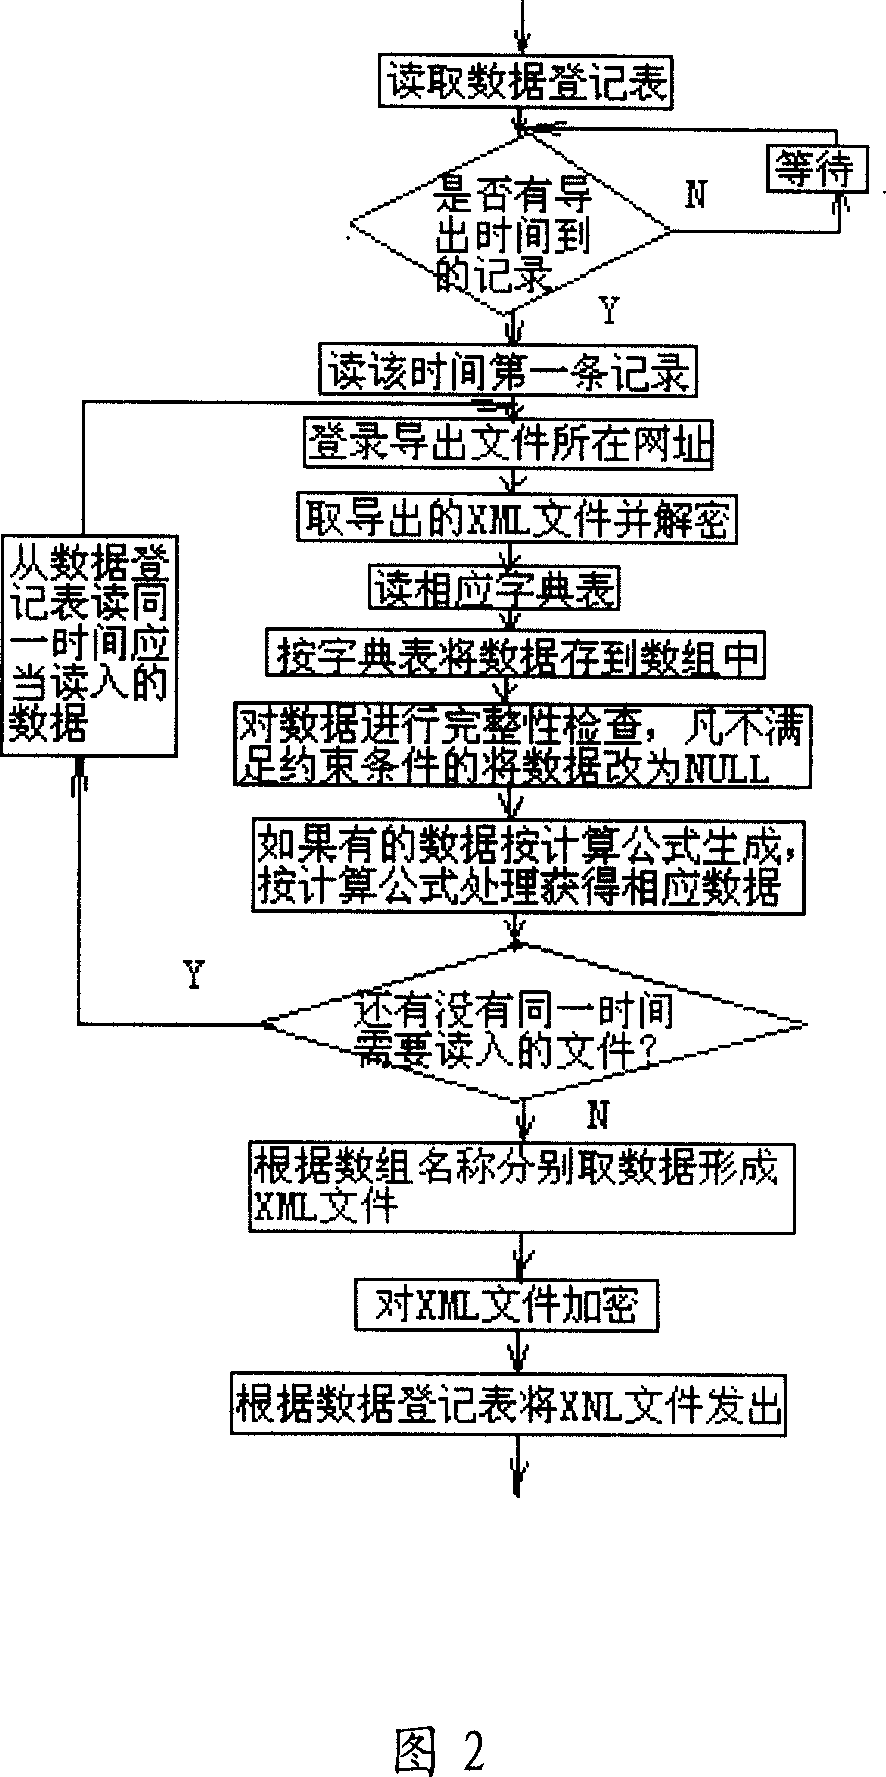 Data integrating method for logic isomeric system in counterpart network